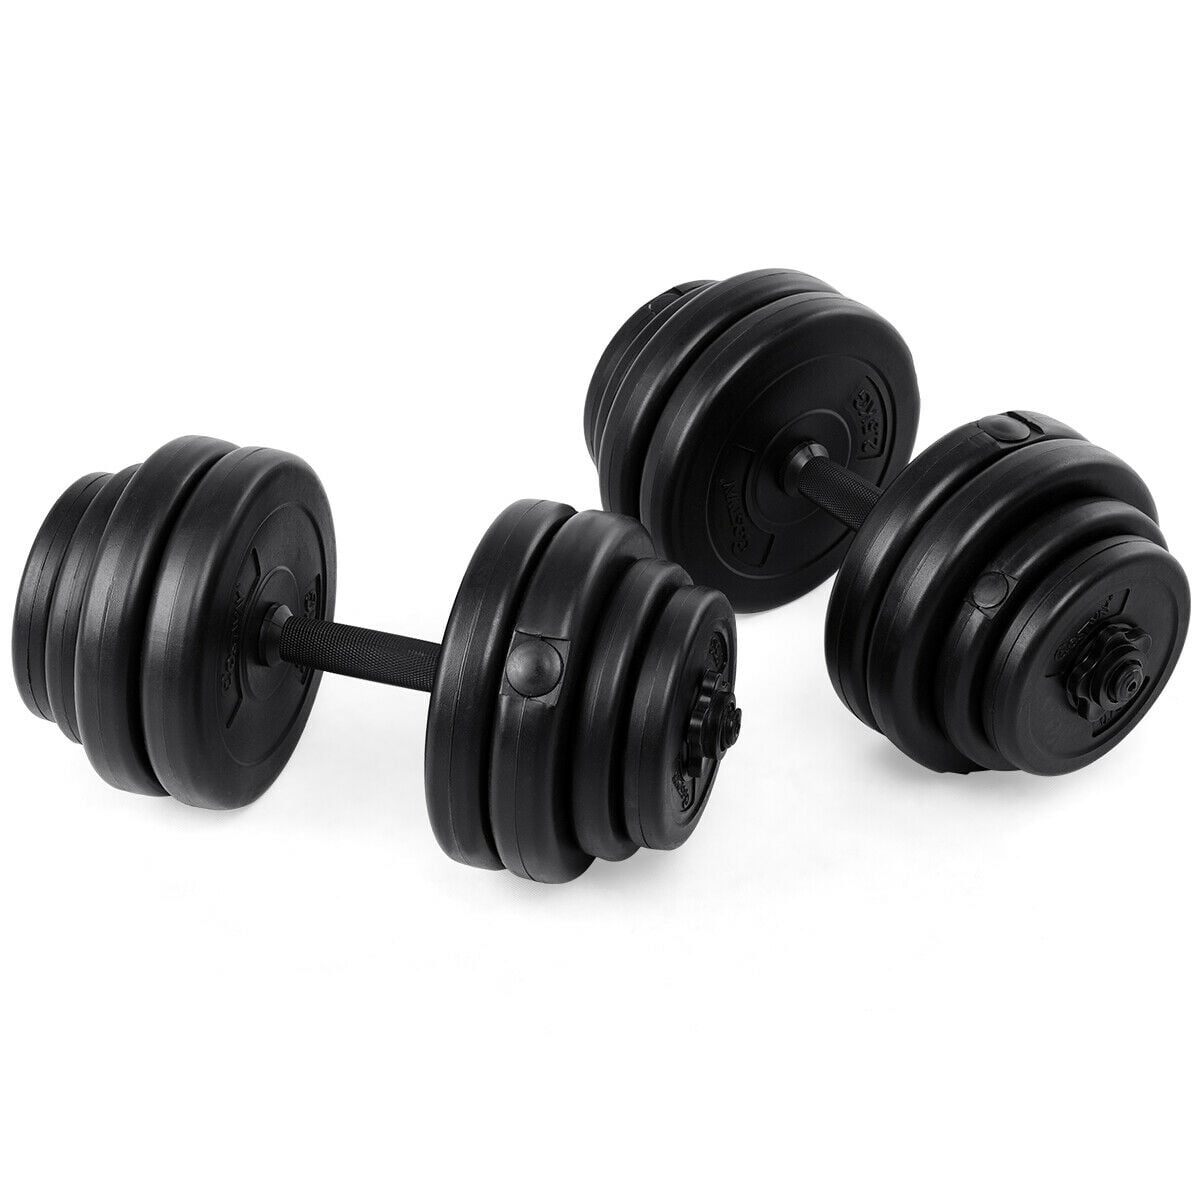 Details about   Totall 44LB Weight Dumbbell Set Cap Gym Barbell Plates Body Workout Adjustable 